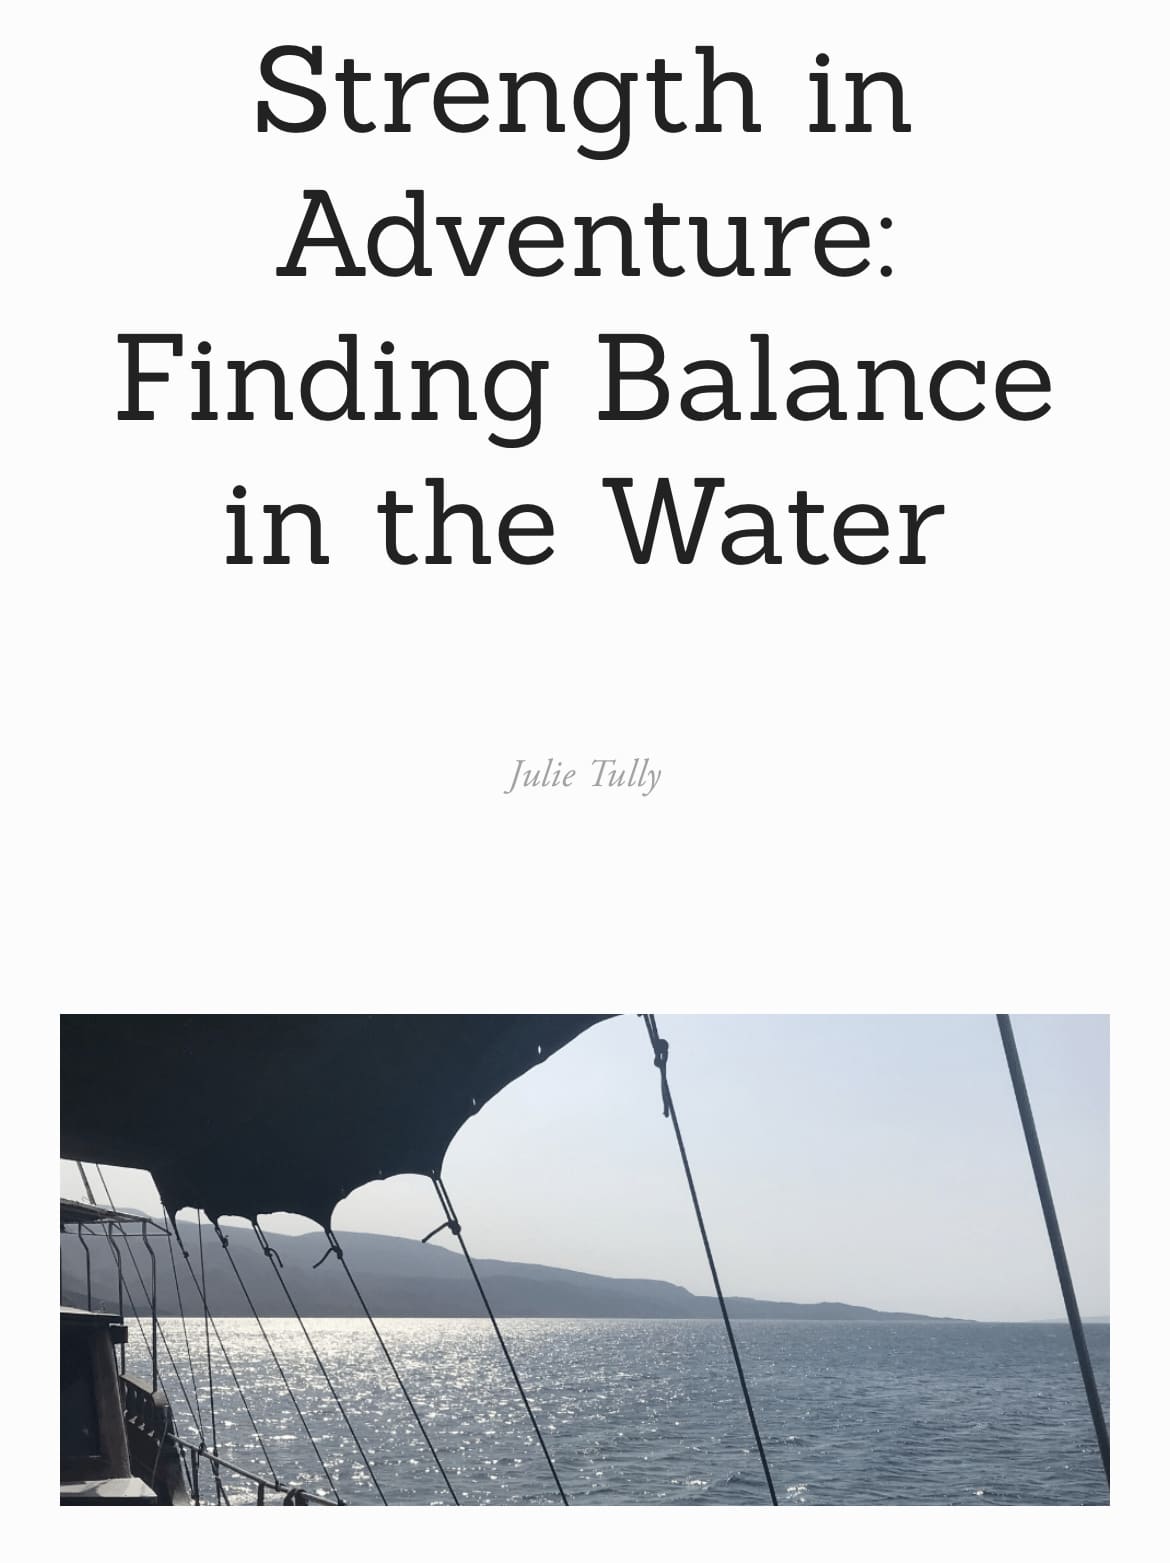 Julie Tully InDependent Magazine Article Finding Balance